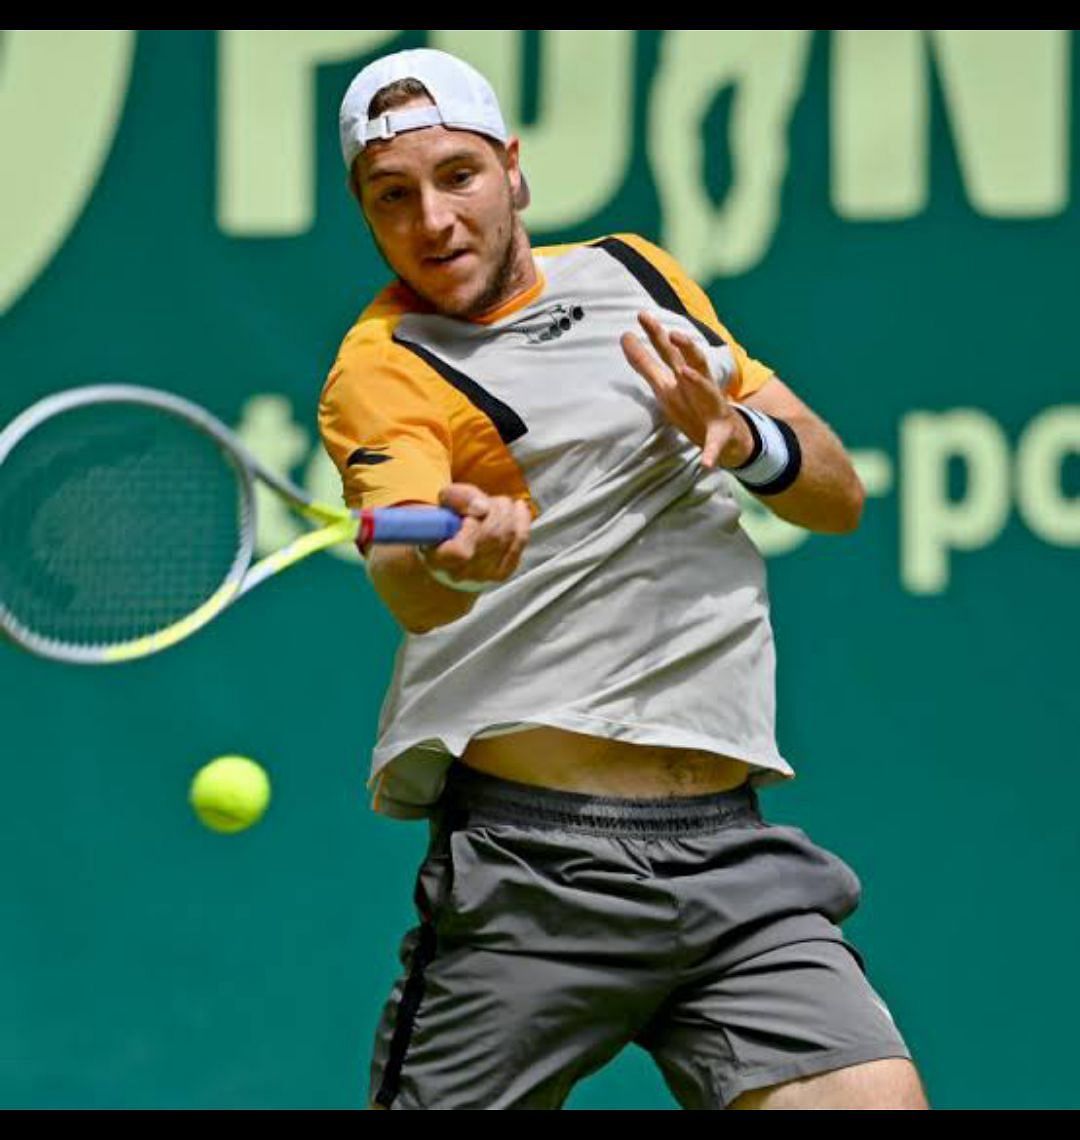 Struff dismantled Zhang in the first round of Stuttgart Open